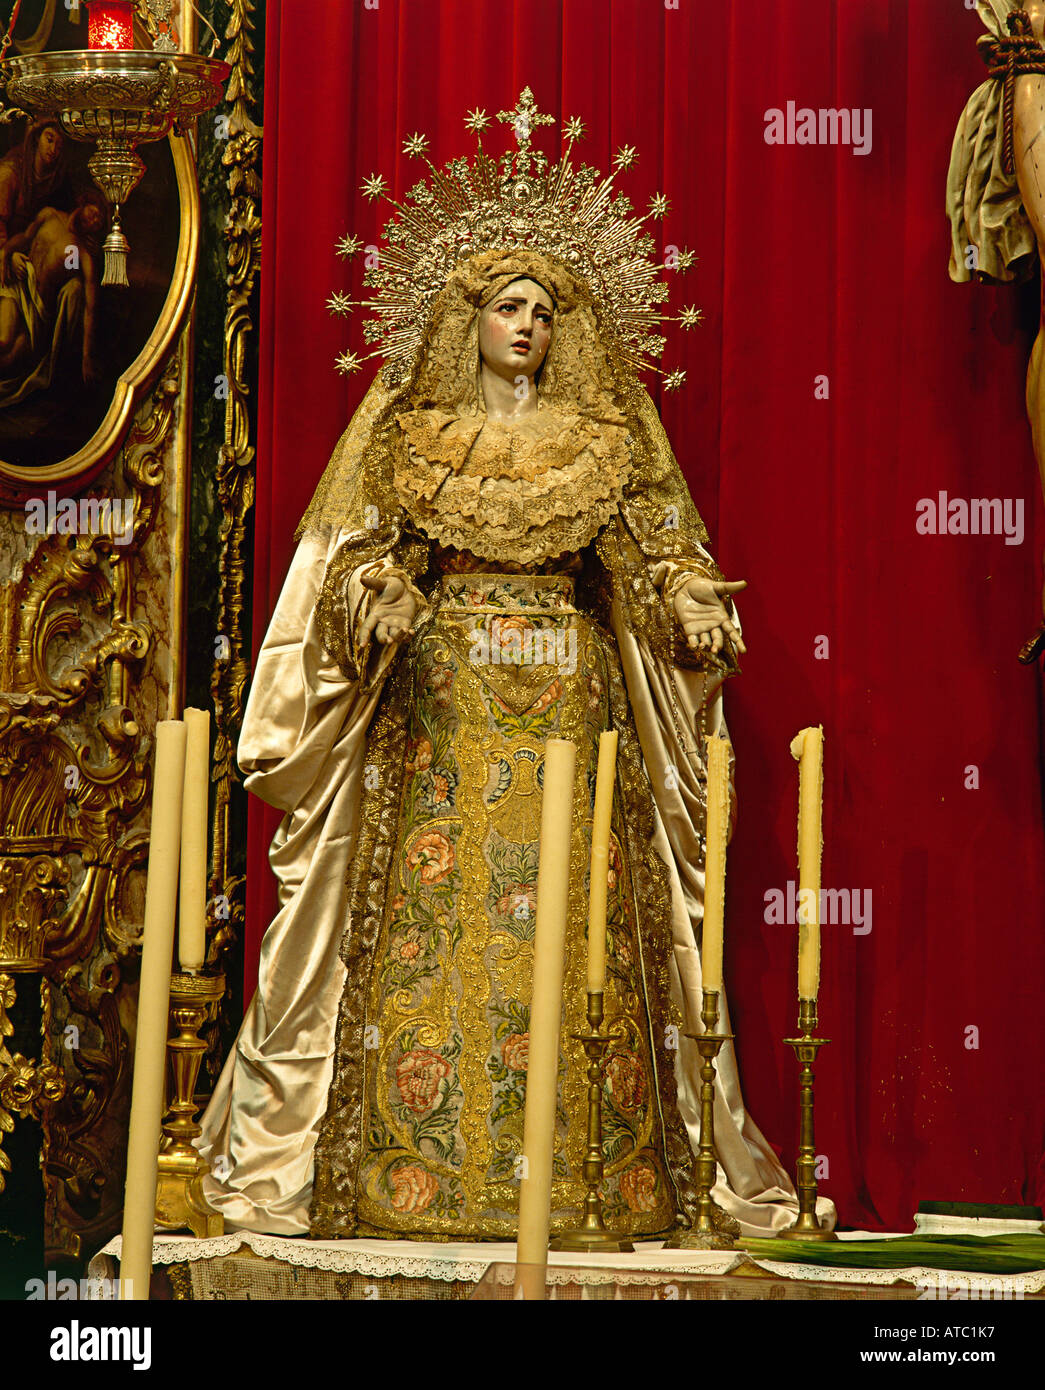 A gilded statue of the Virgin is rich in decorative detail inside the Inglesia de San Felipe Neri in Cadiz where the constitution which shaped the beginnings of Spain s liberty was instigated Stock Photo